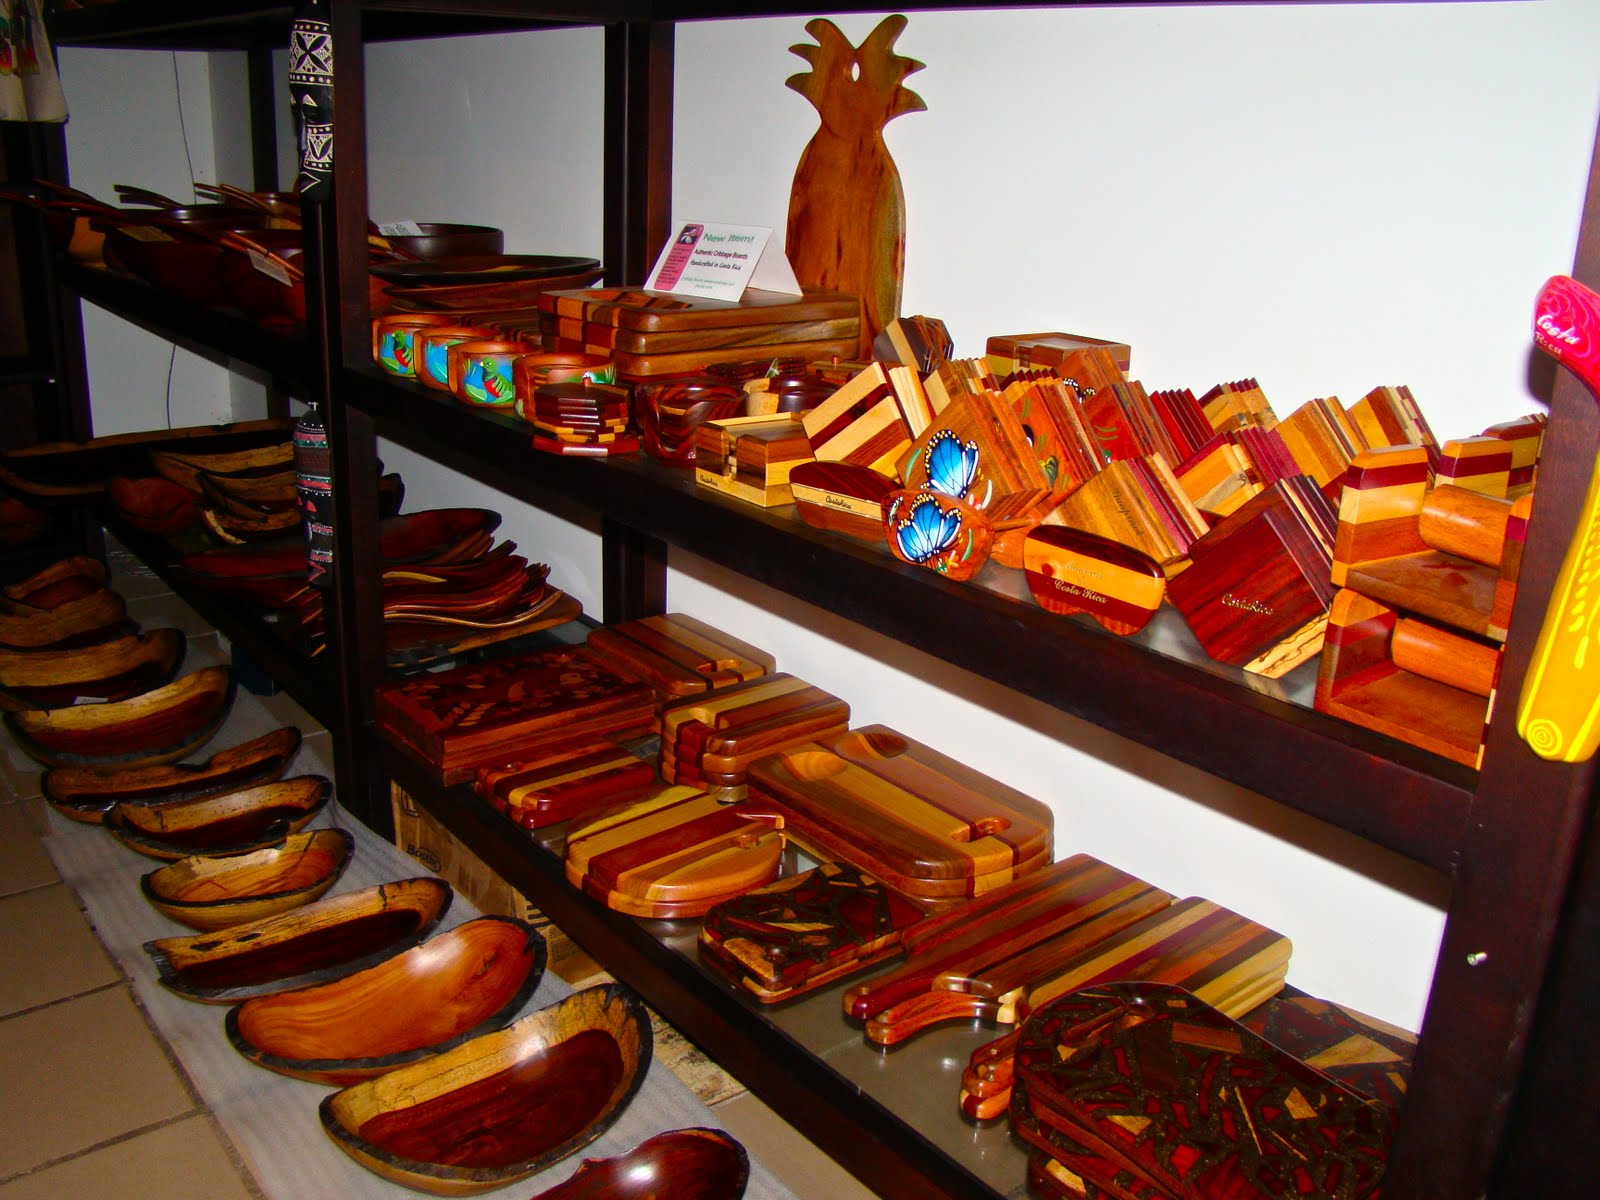 Here is a photo of some of the additional Costa Rica wood products for sale...